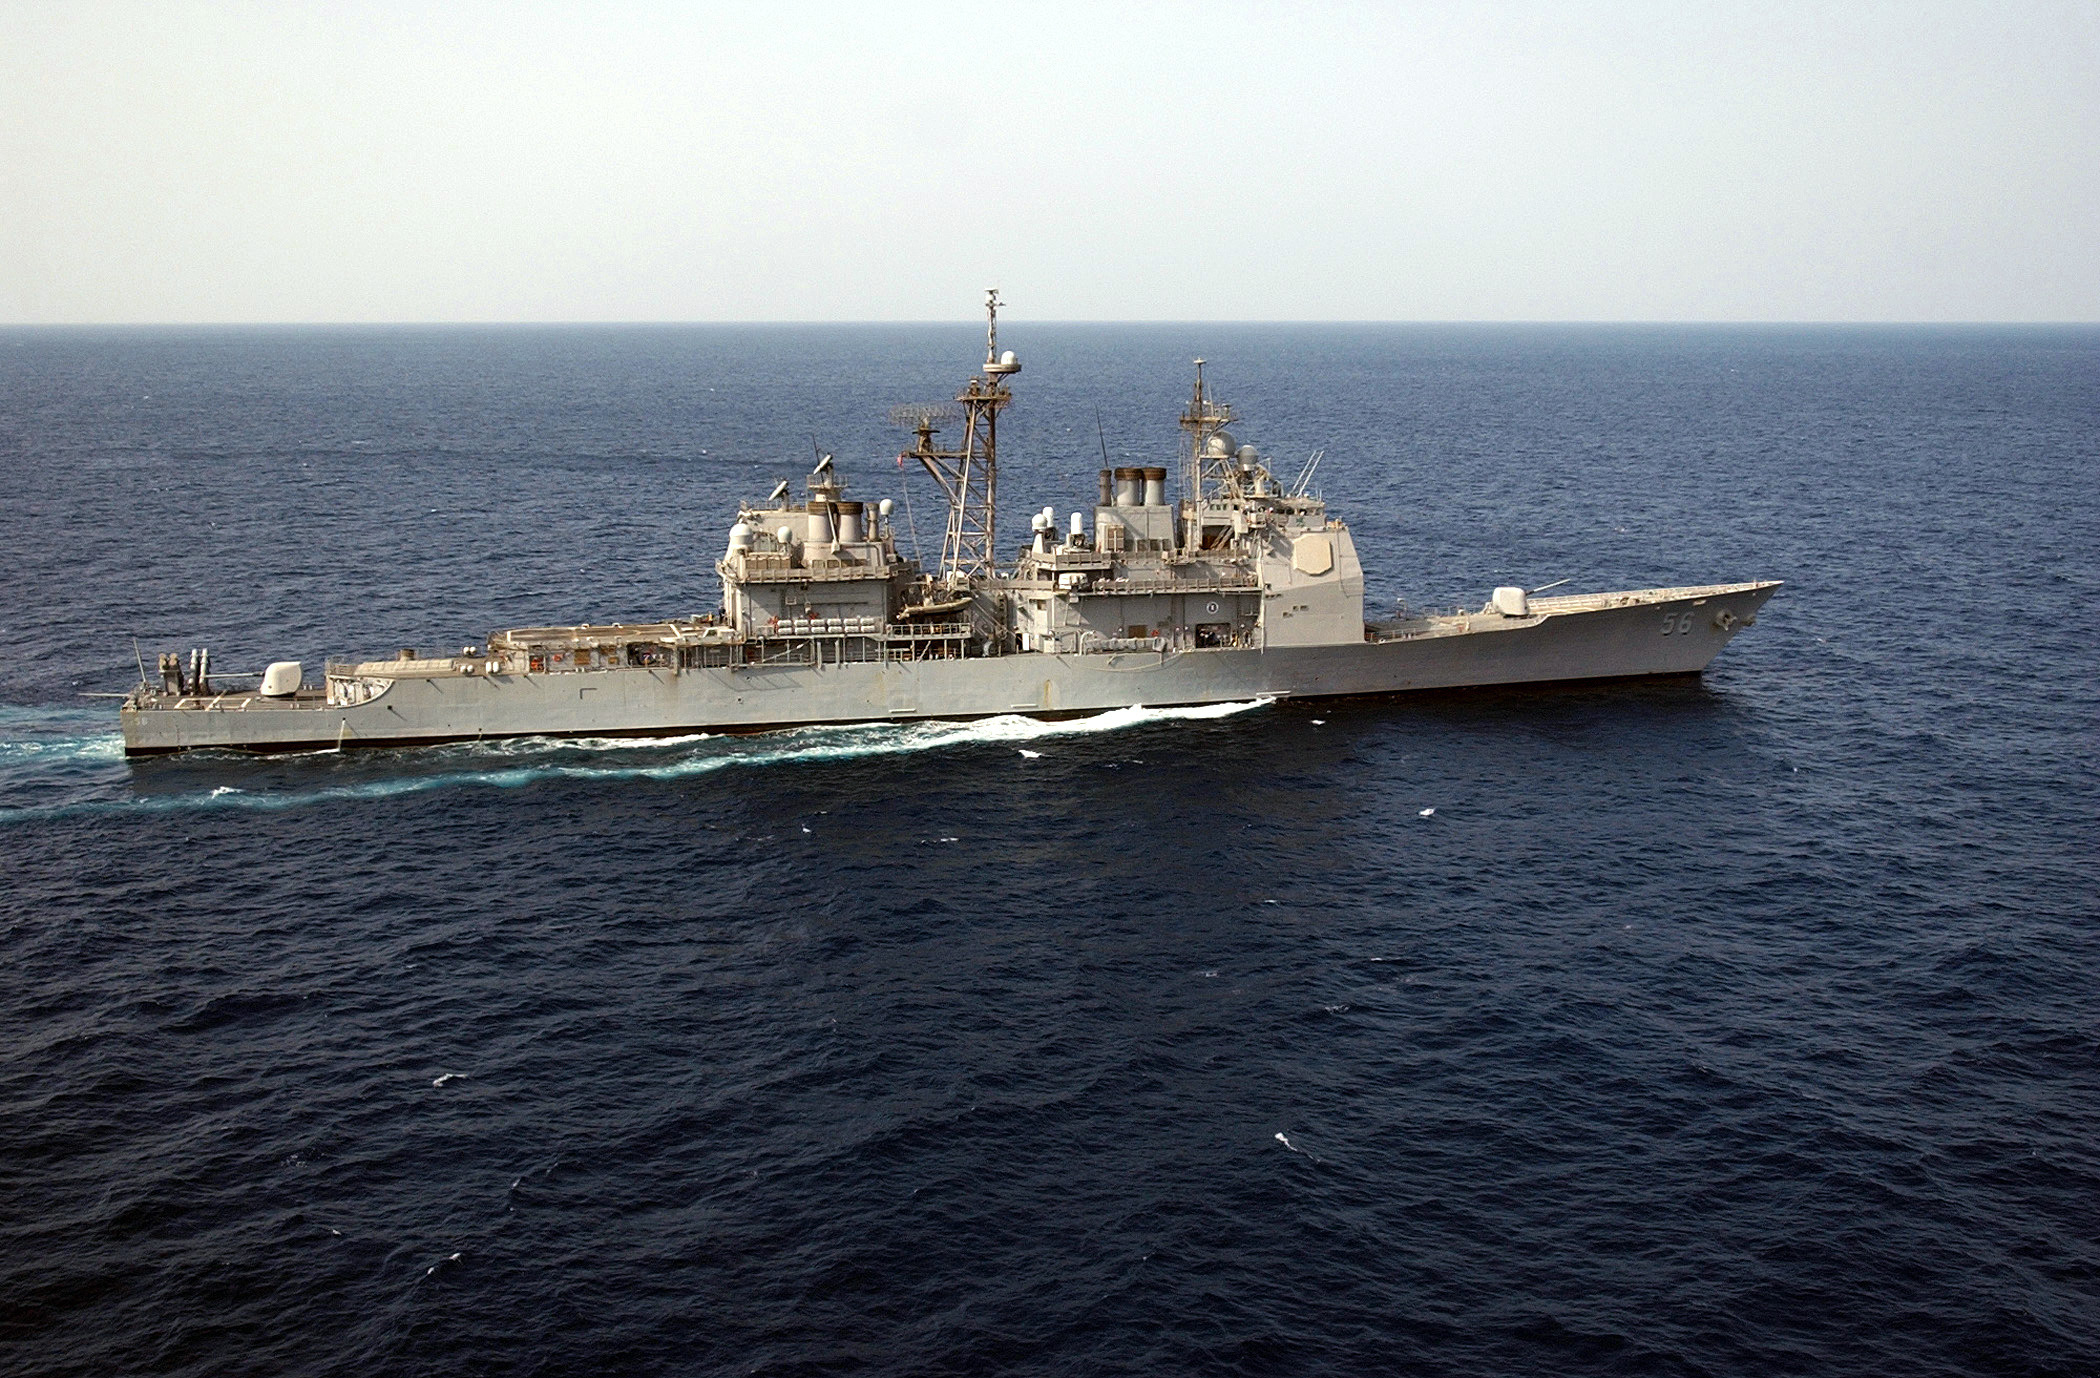 US Navy 030321-N-6141B-001 The guided missile cruiser USS San Jacinto (CG 56) underway conducting combat missions in support of Operation Iraqi Freedom